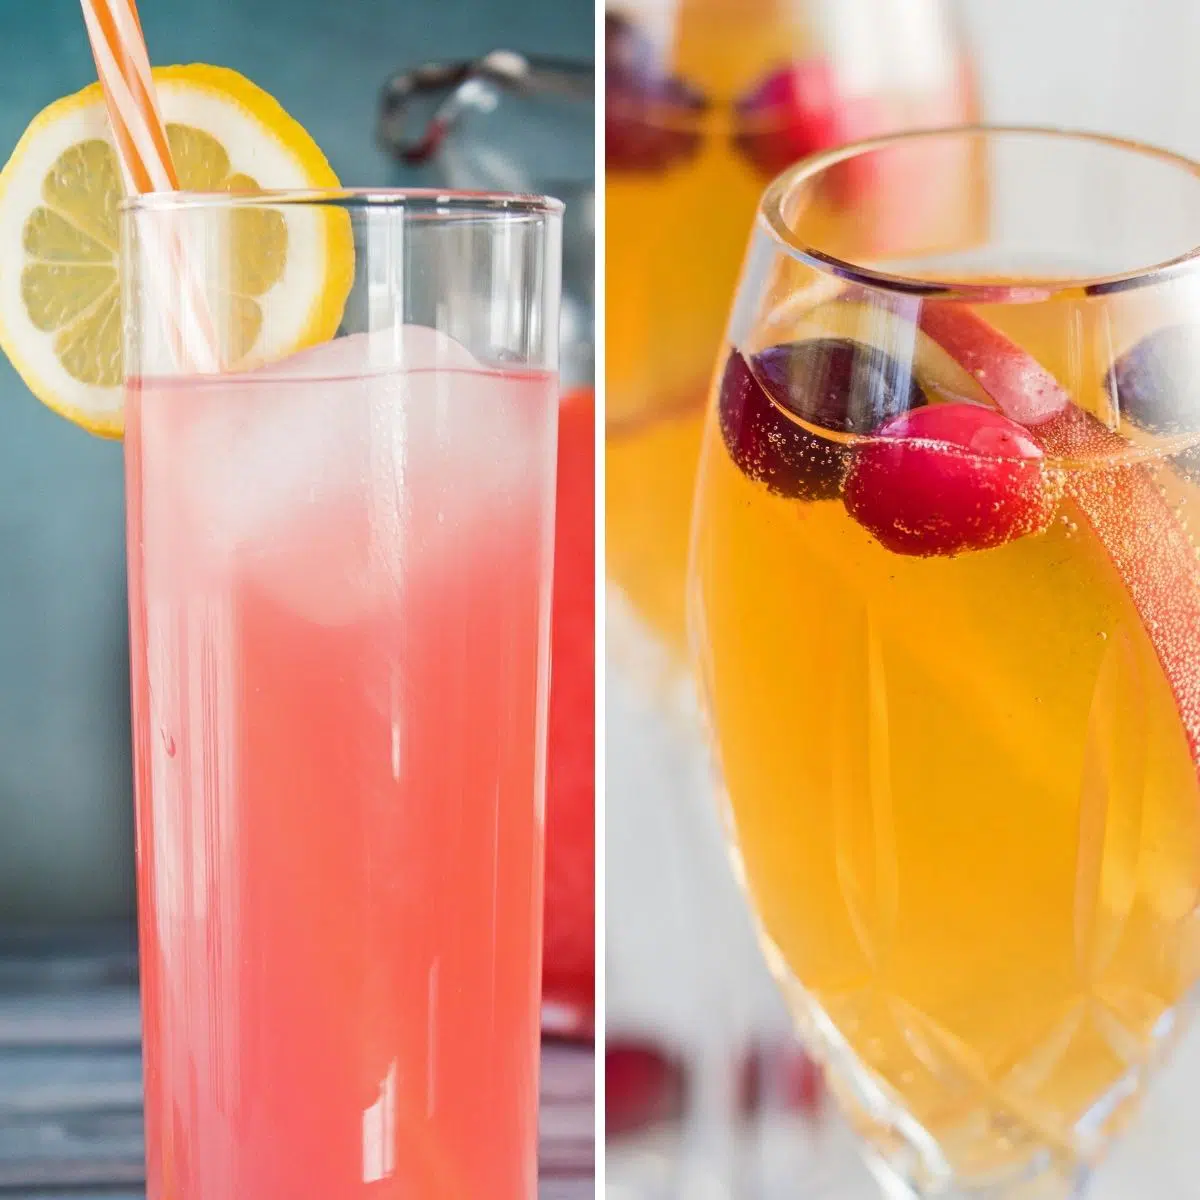 Best mocktail recipes image showing two tasty favorites in clear glasses in a side by side square image.